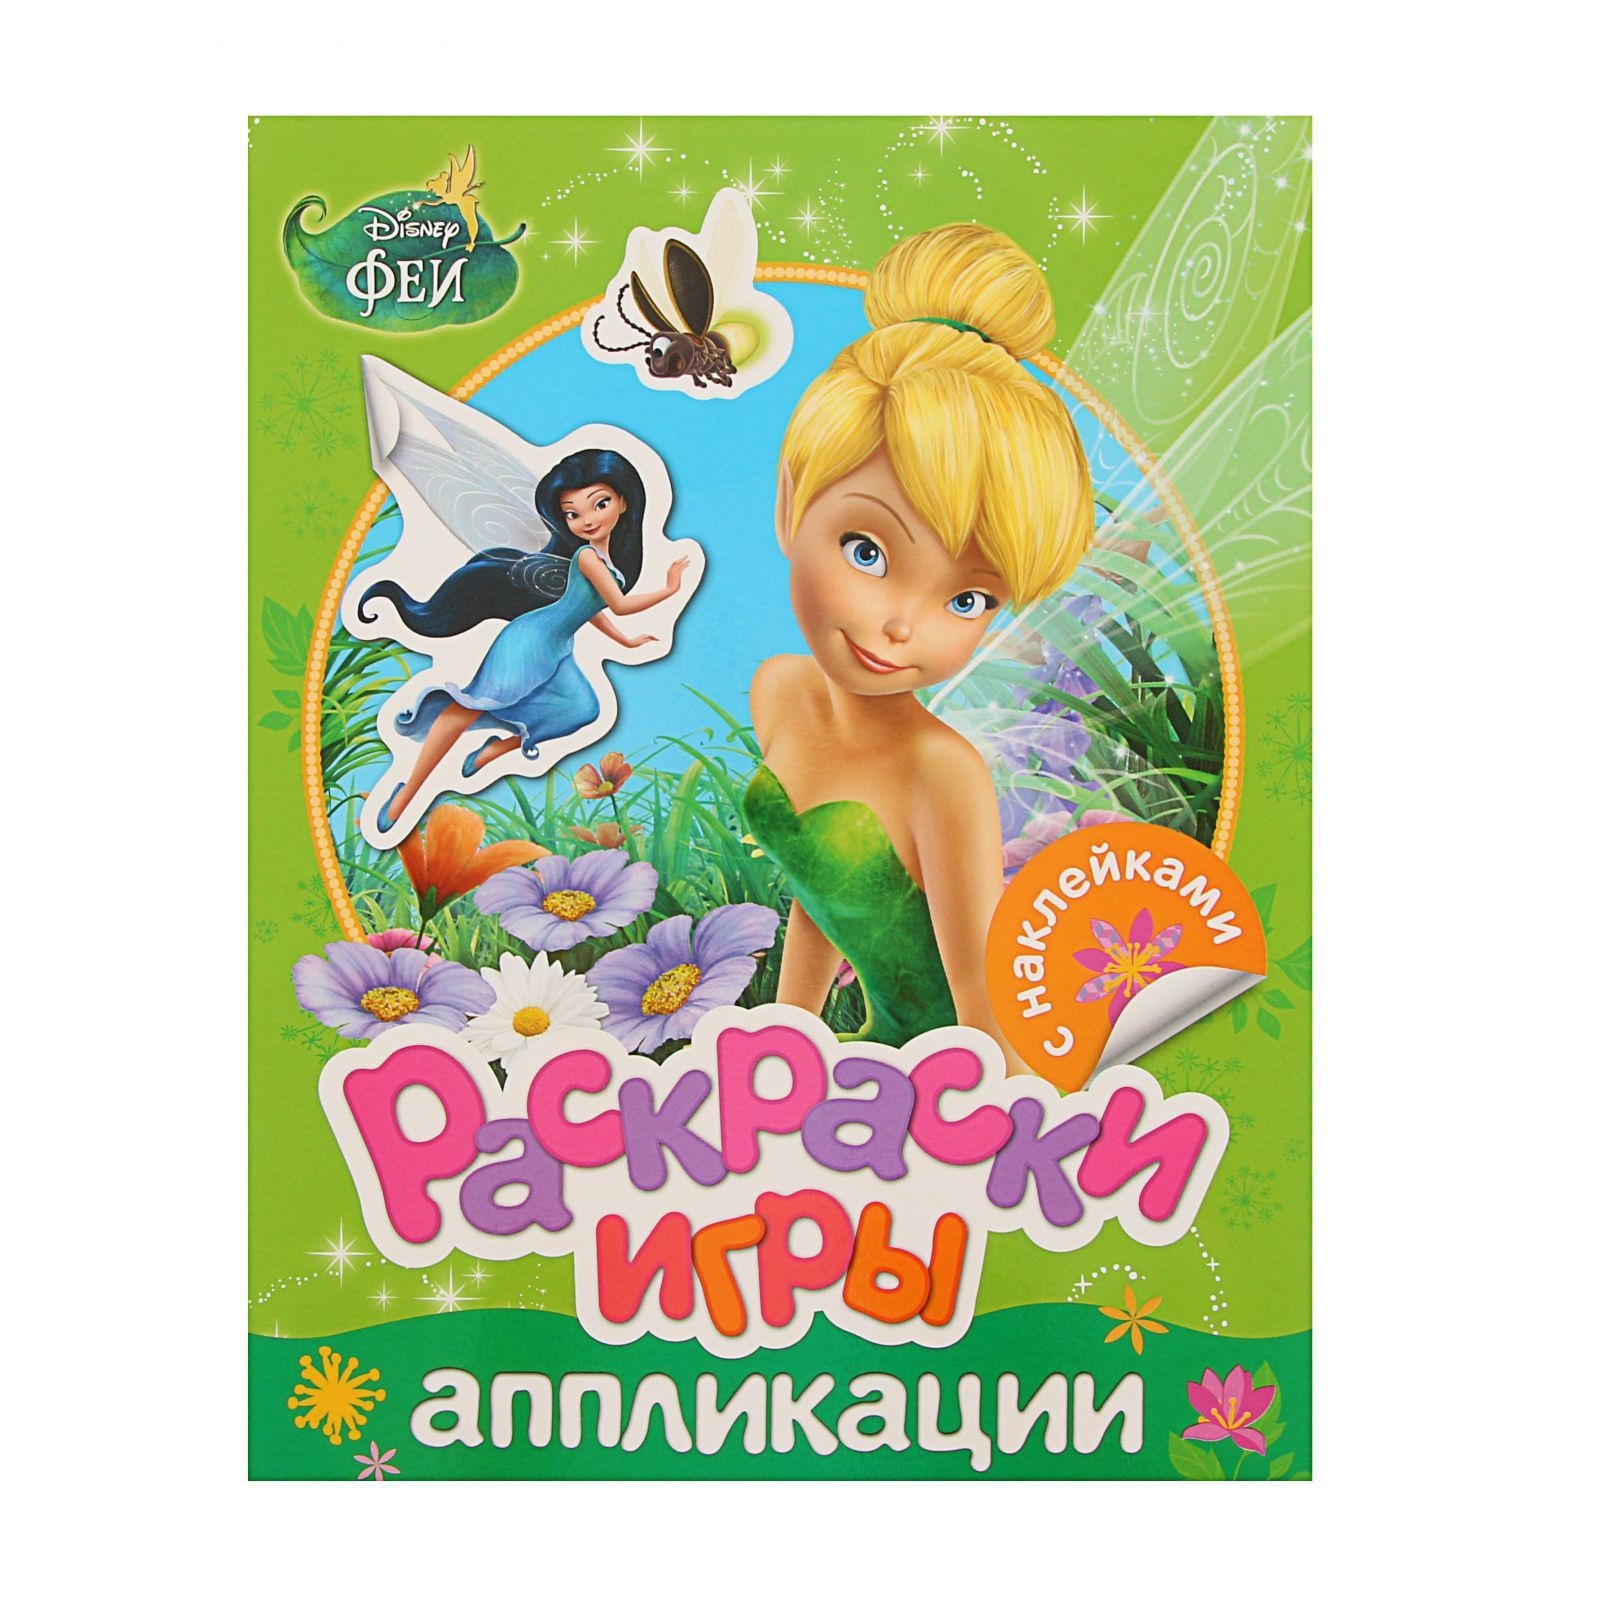 Disney fairies with stickers #10